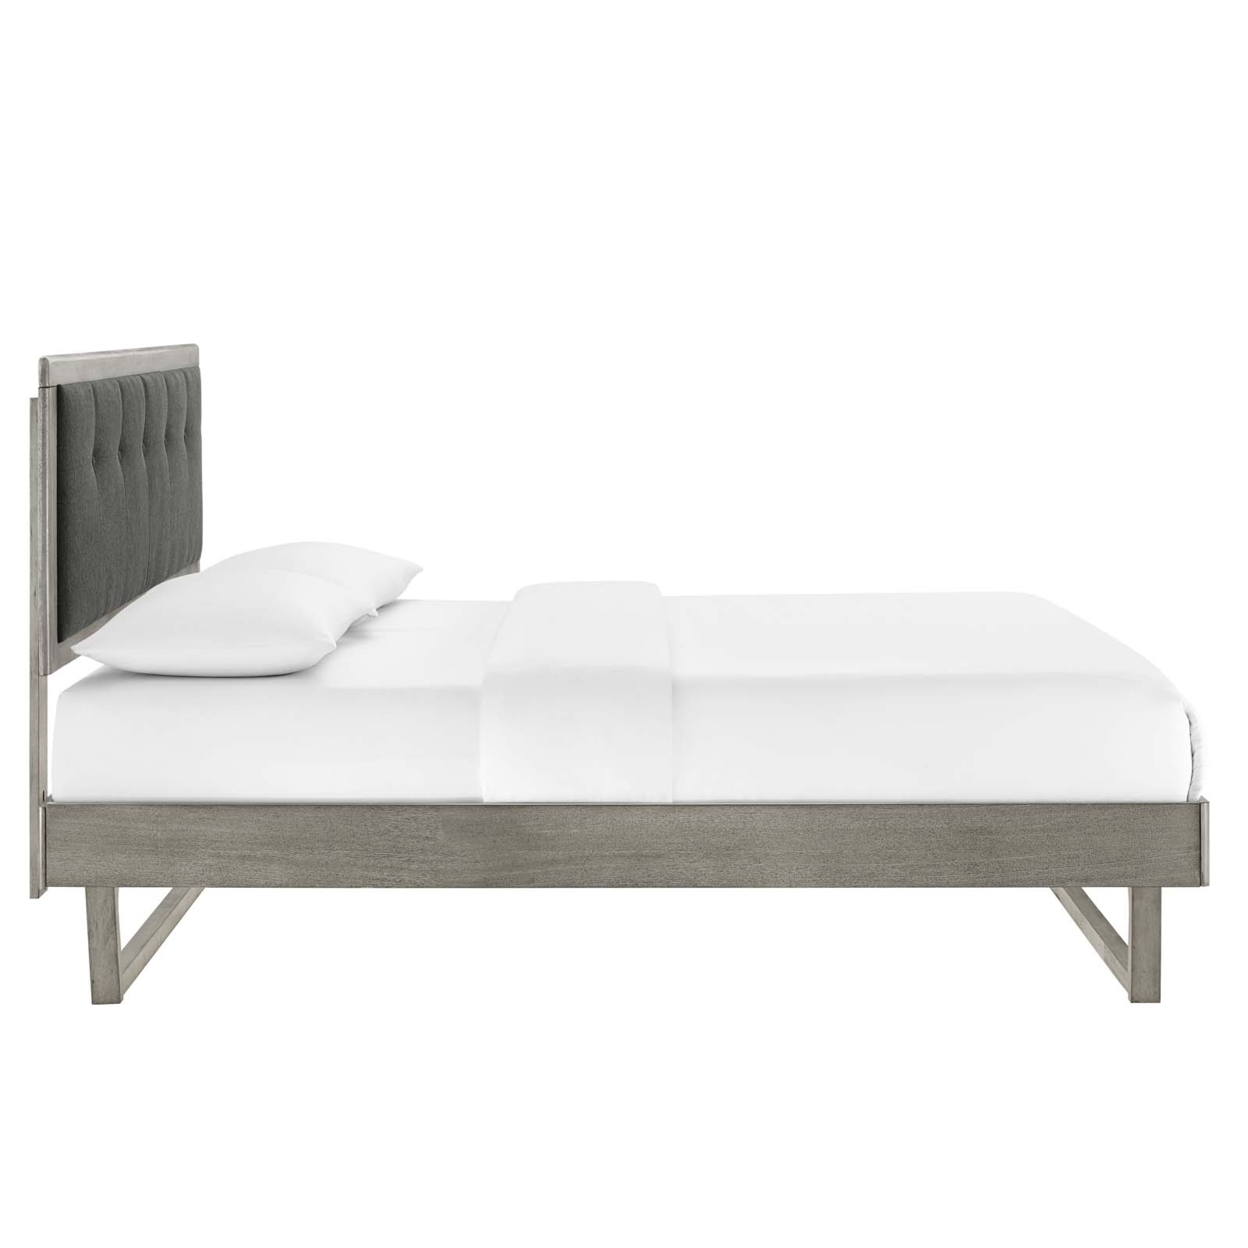 Willow Full Wood Platform Bed With Angular Frame, Gray Charcoal